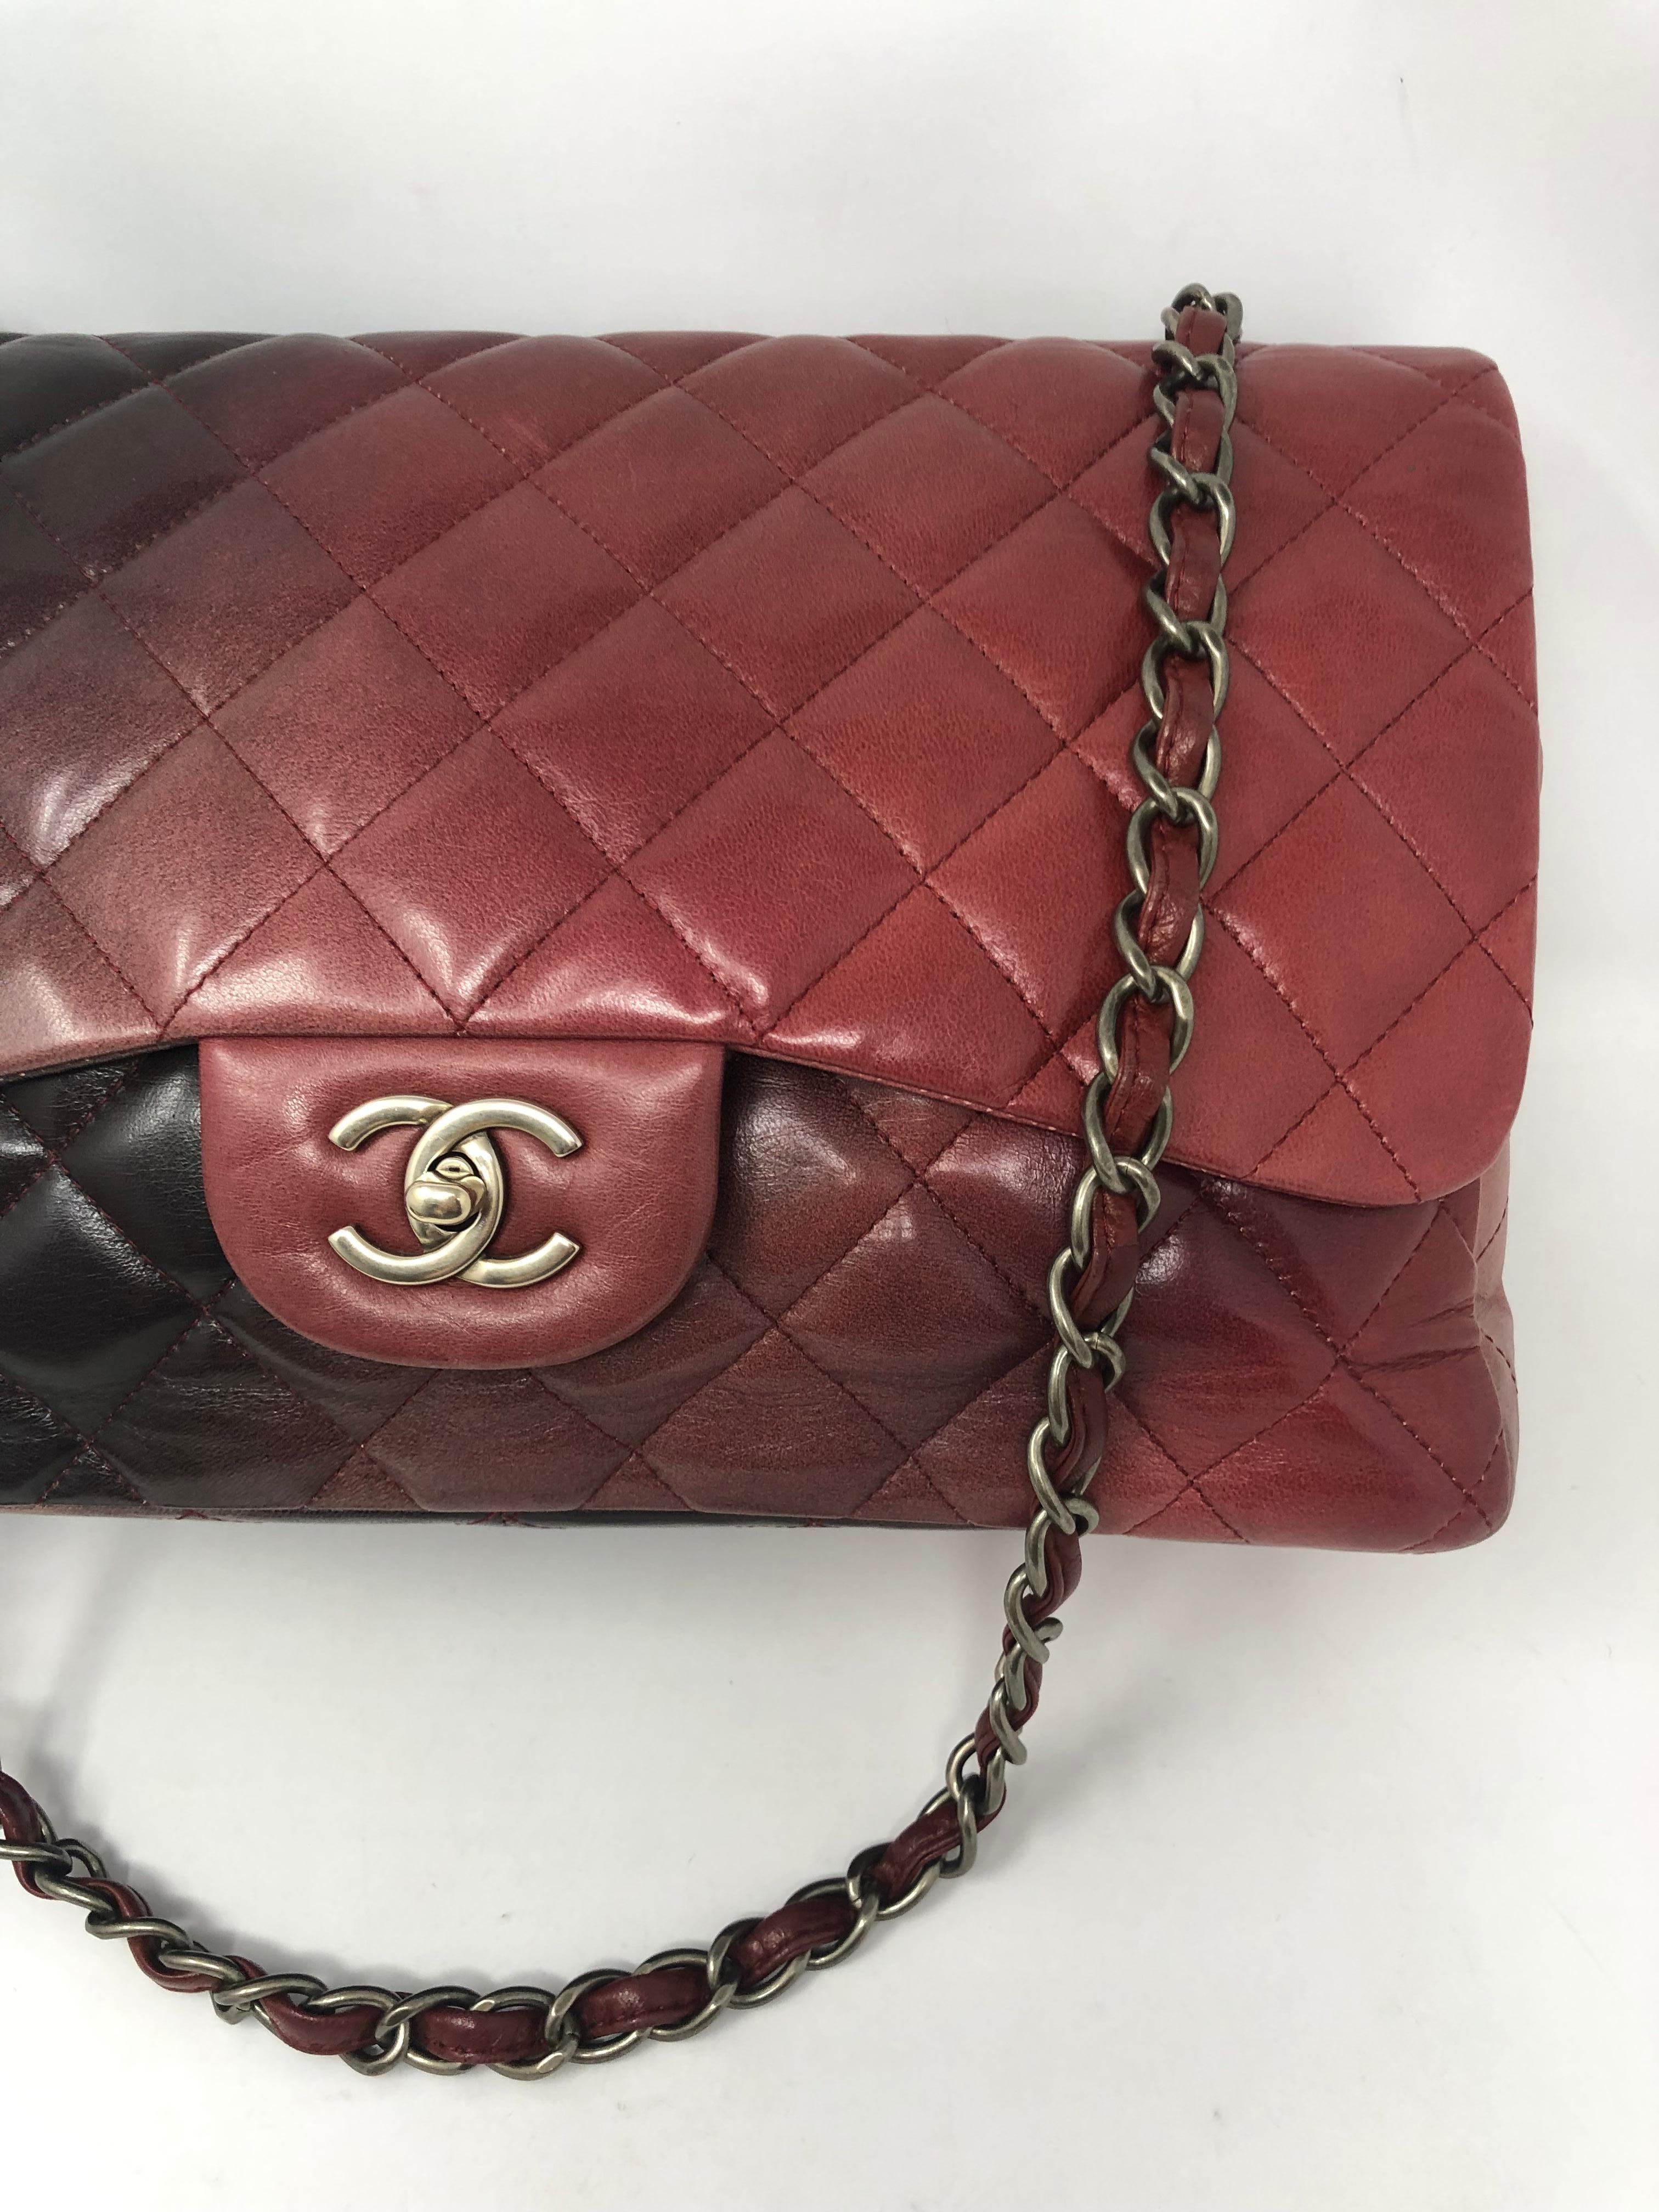 Chanel Burgundy Ombre Jumbo Bag. Classic style with black to red ombre shades. Matte gold hardware. Mint condition. Rare and limited Chanel. Guaranteed authentic. 